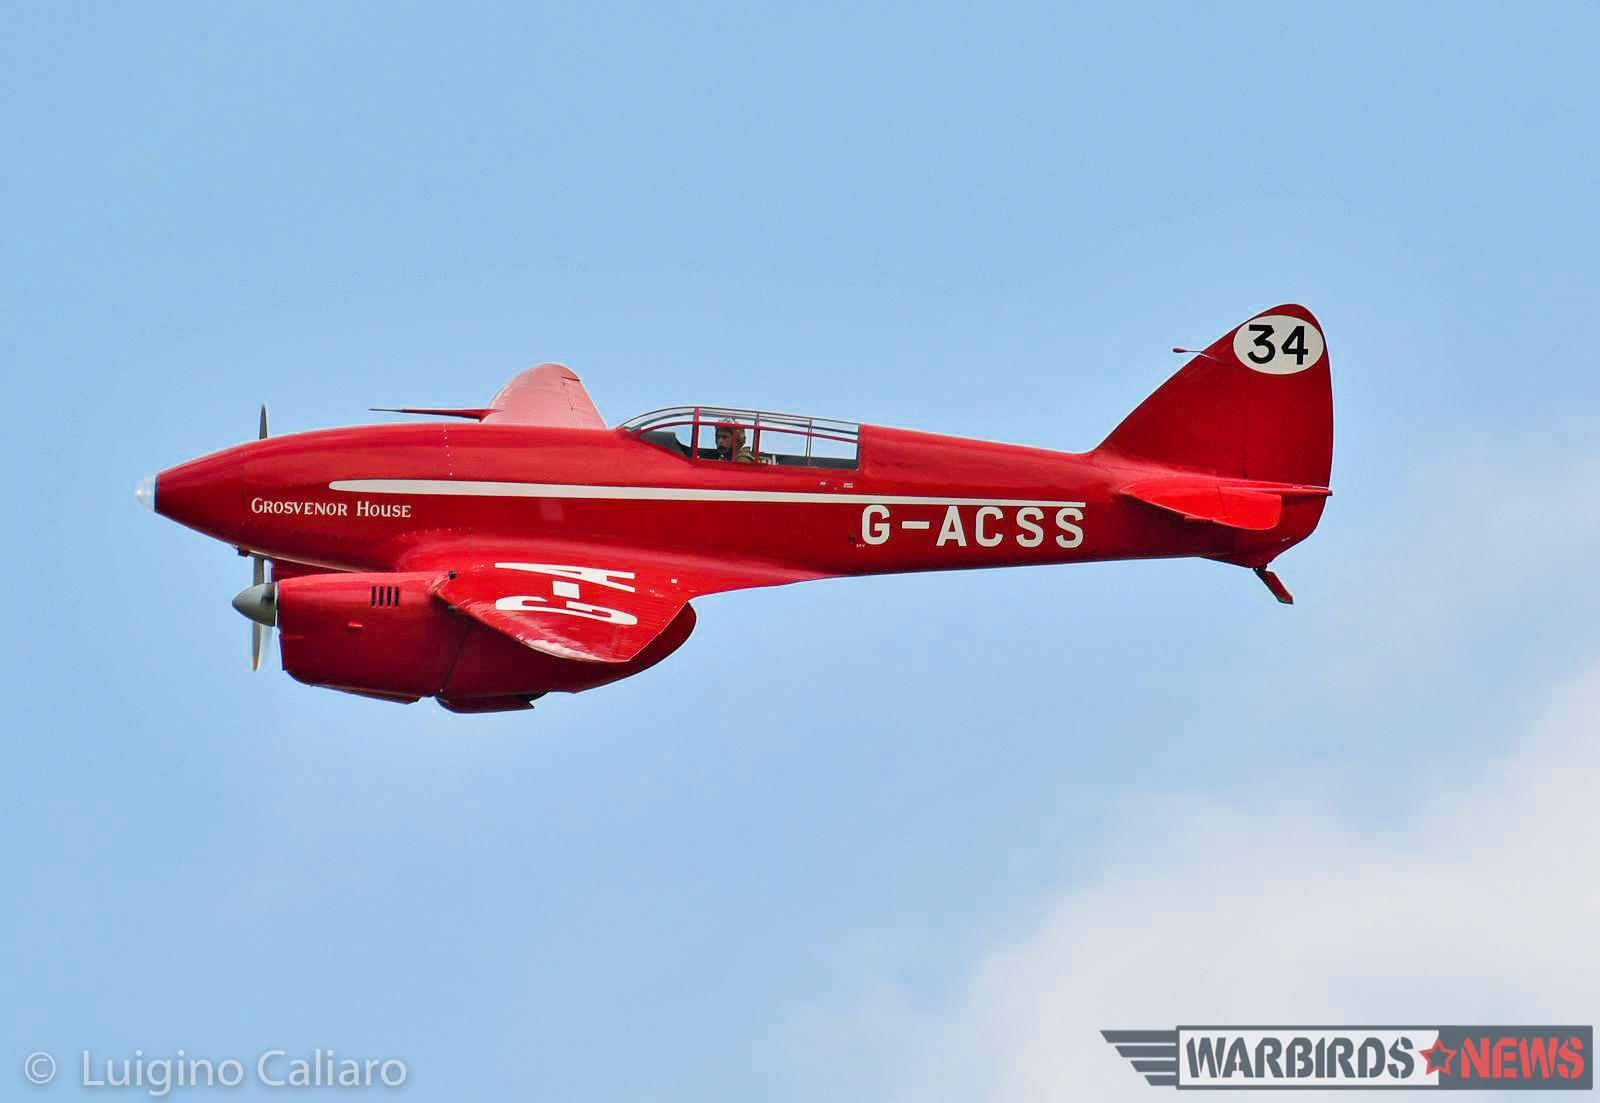 The legendary DH.88 Comet 'Grosvenor House' owned by the Shuttleworth Collection. This very aircraft won the London-to-Sydney McRobertson Air Race in 1934. (photo by Luigino Caliaro)